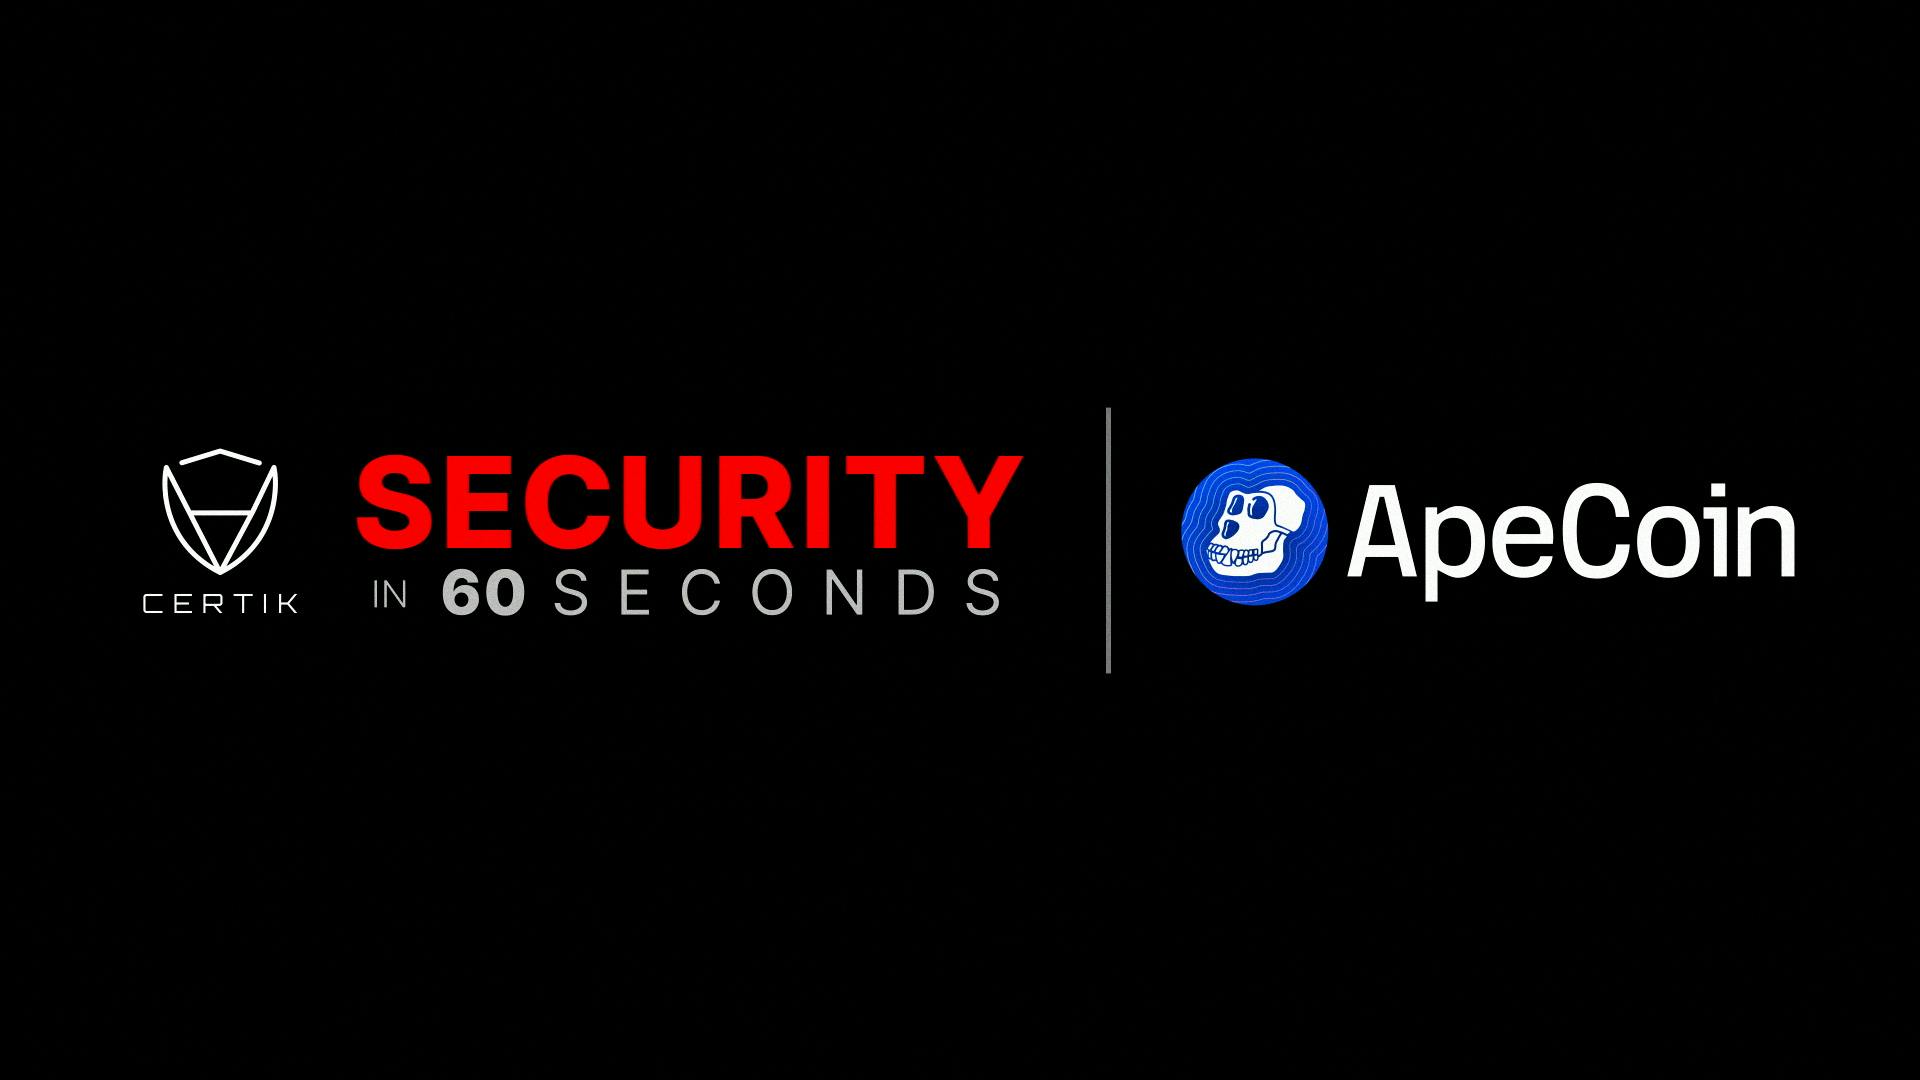 Security in 60 Seconds - ApeCoin